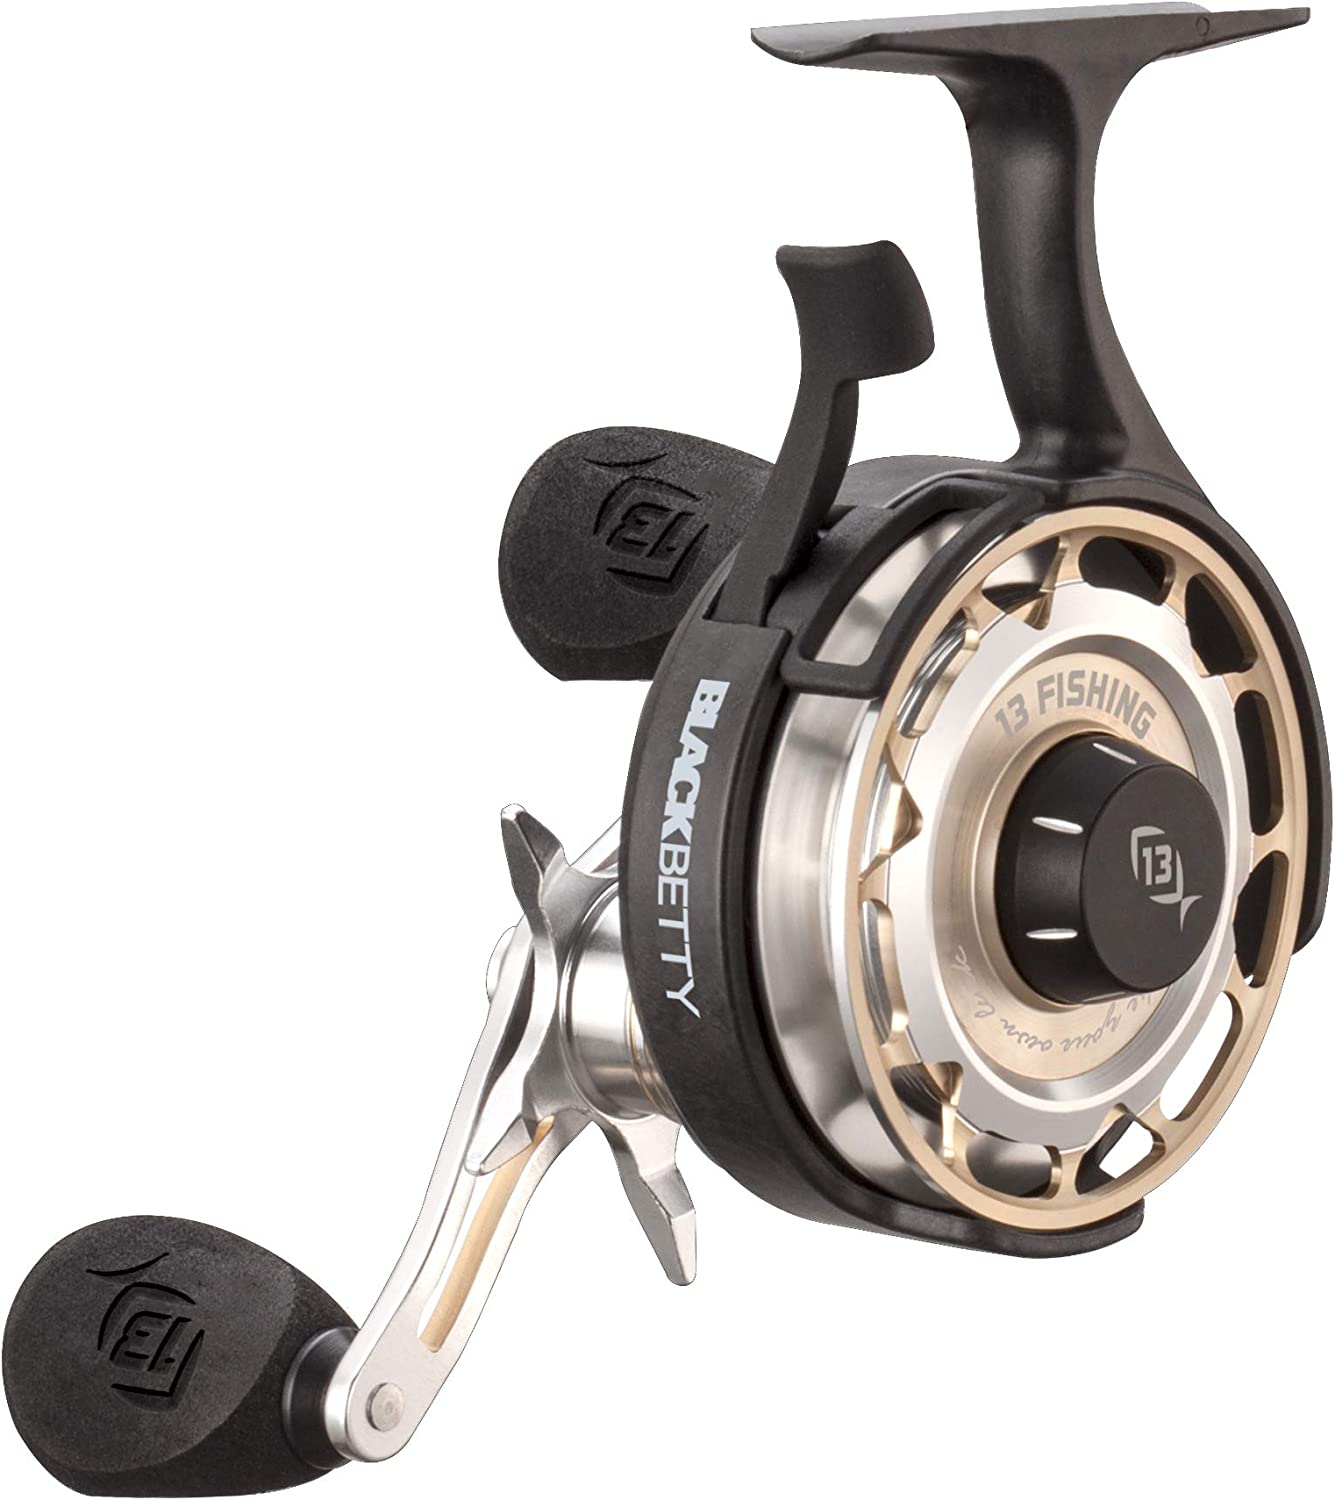 13 Fishing Descent Inline Ice Fishing Reel-Right Hand Reel